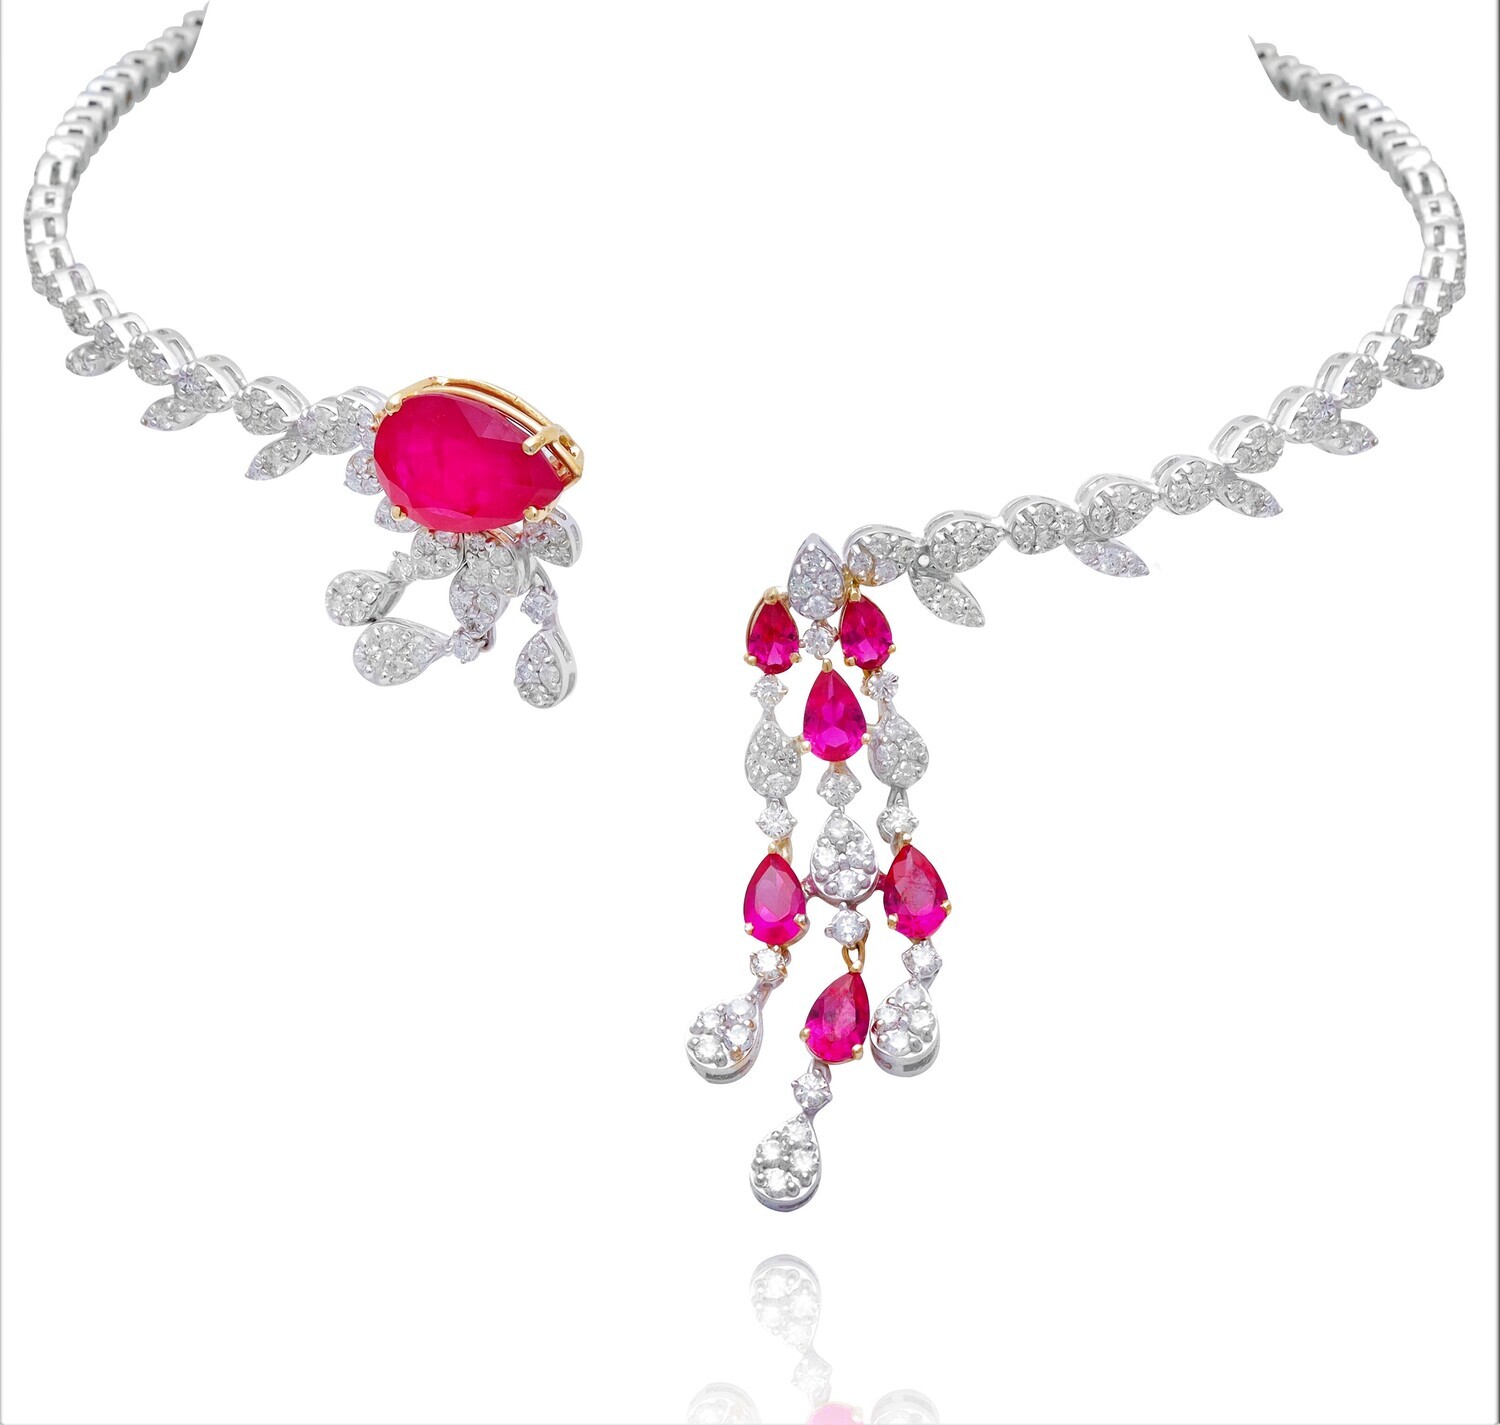 Eternal Diamond Necklace with Pink Stones